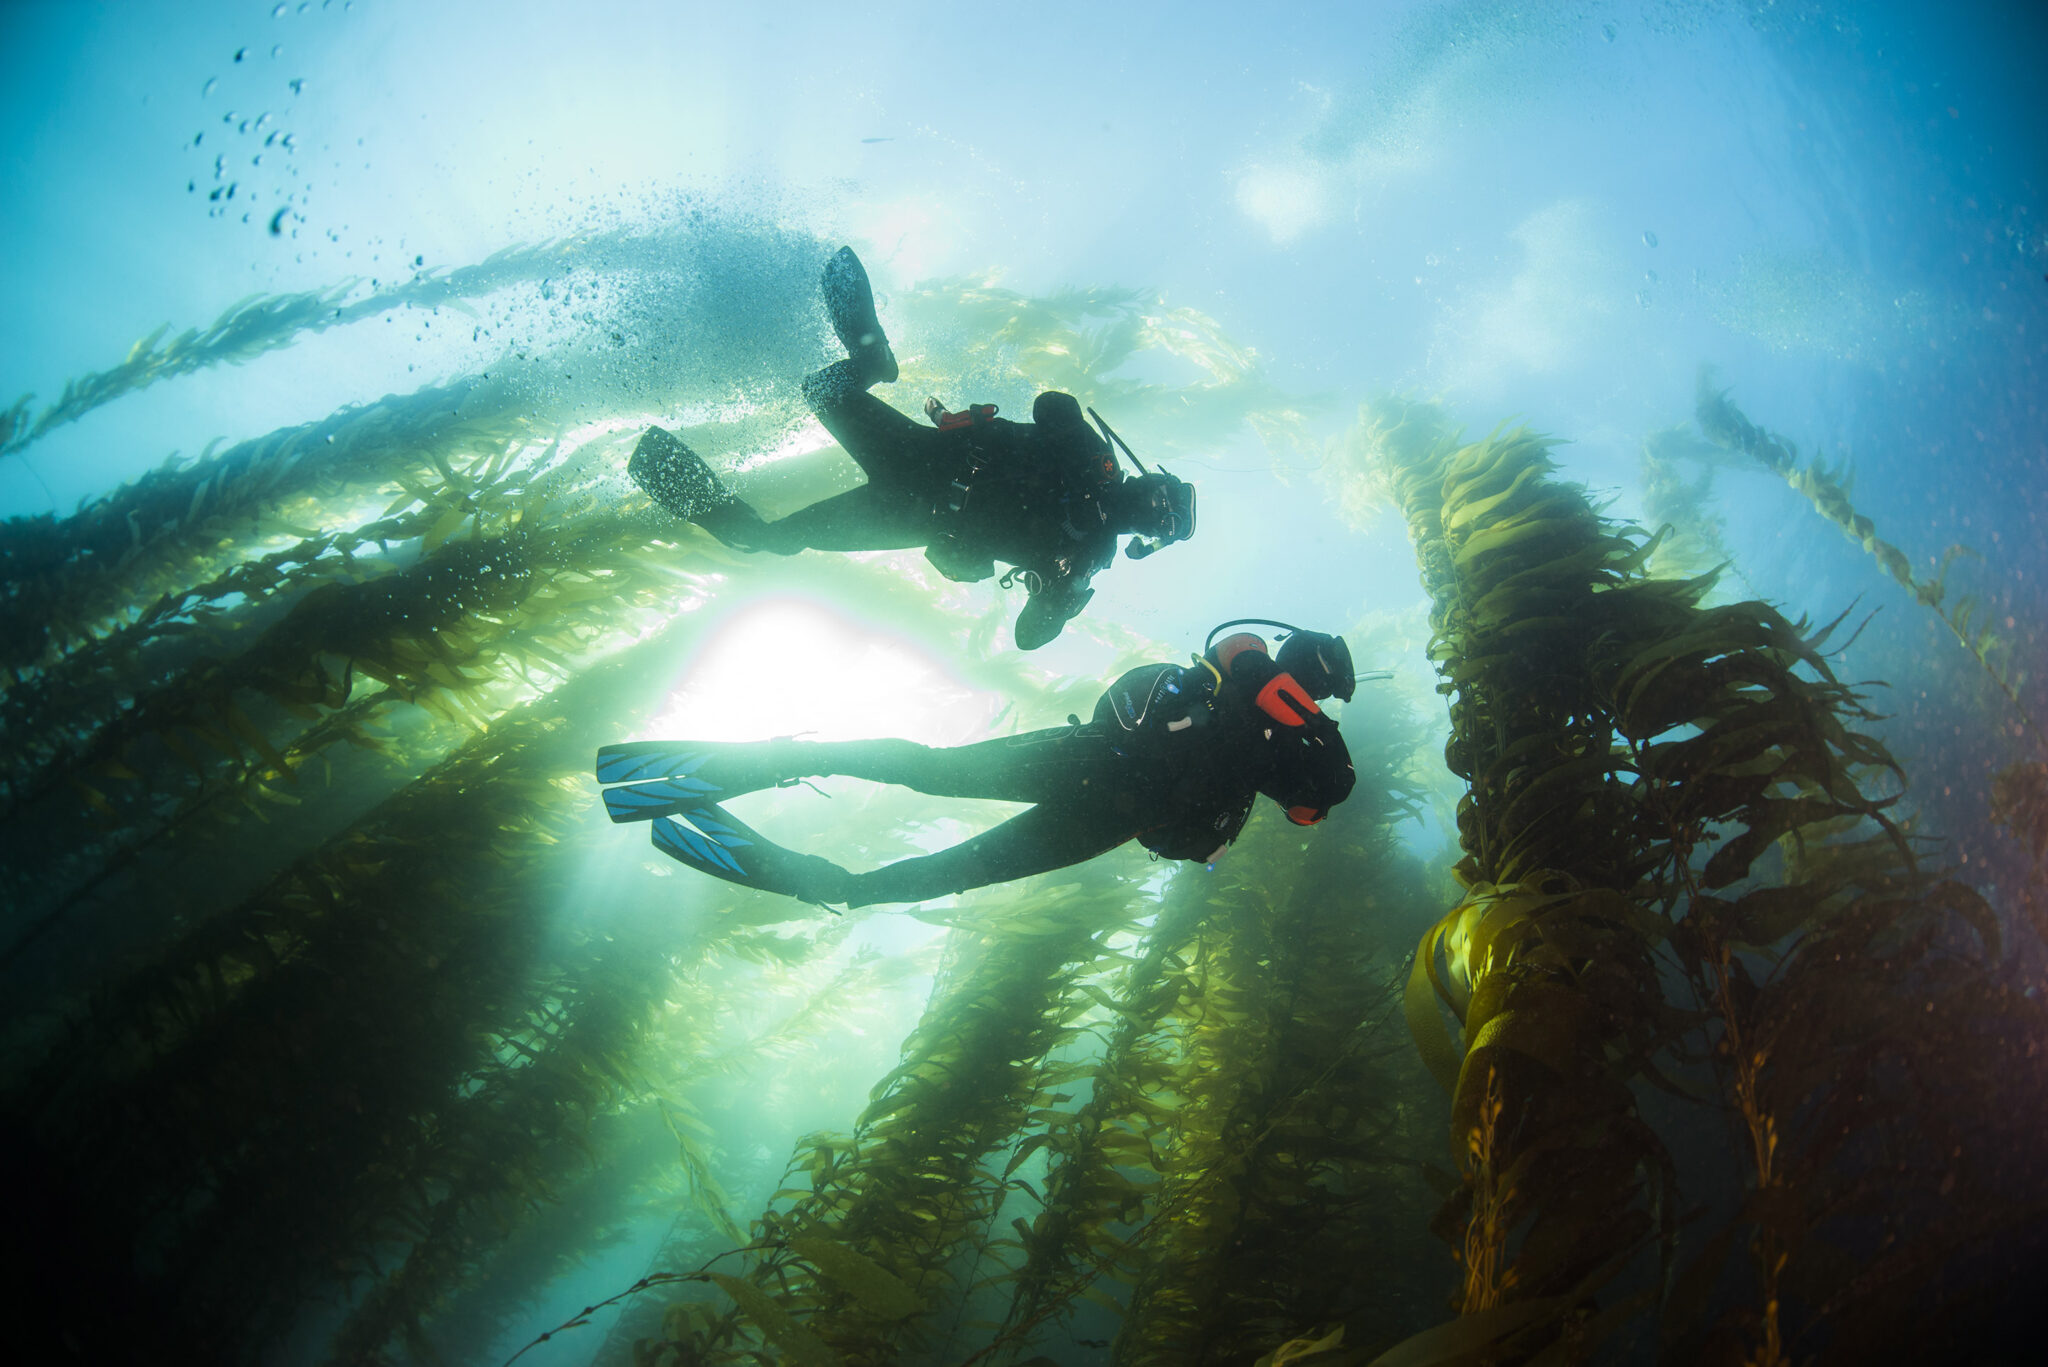 Two scuba divers in a California kelp forest